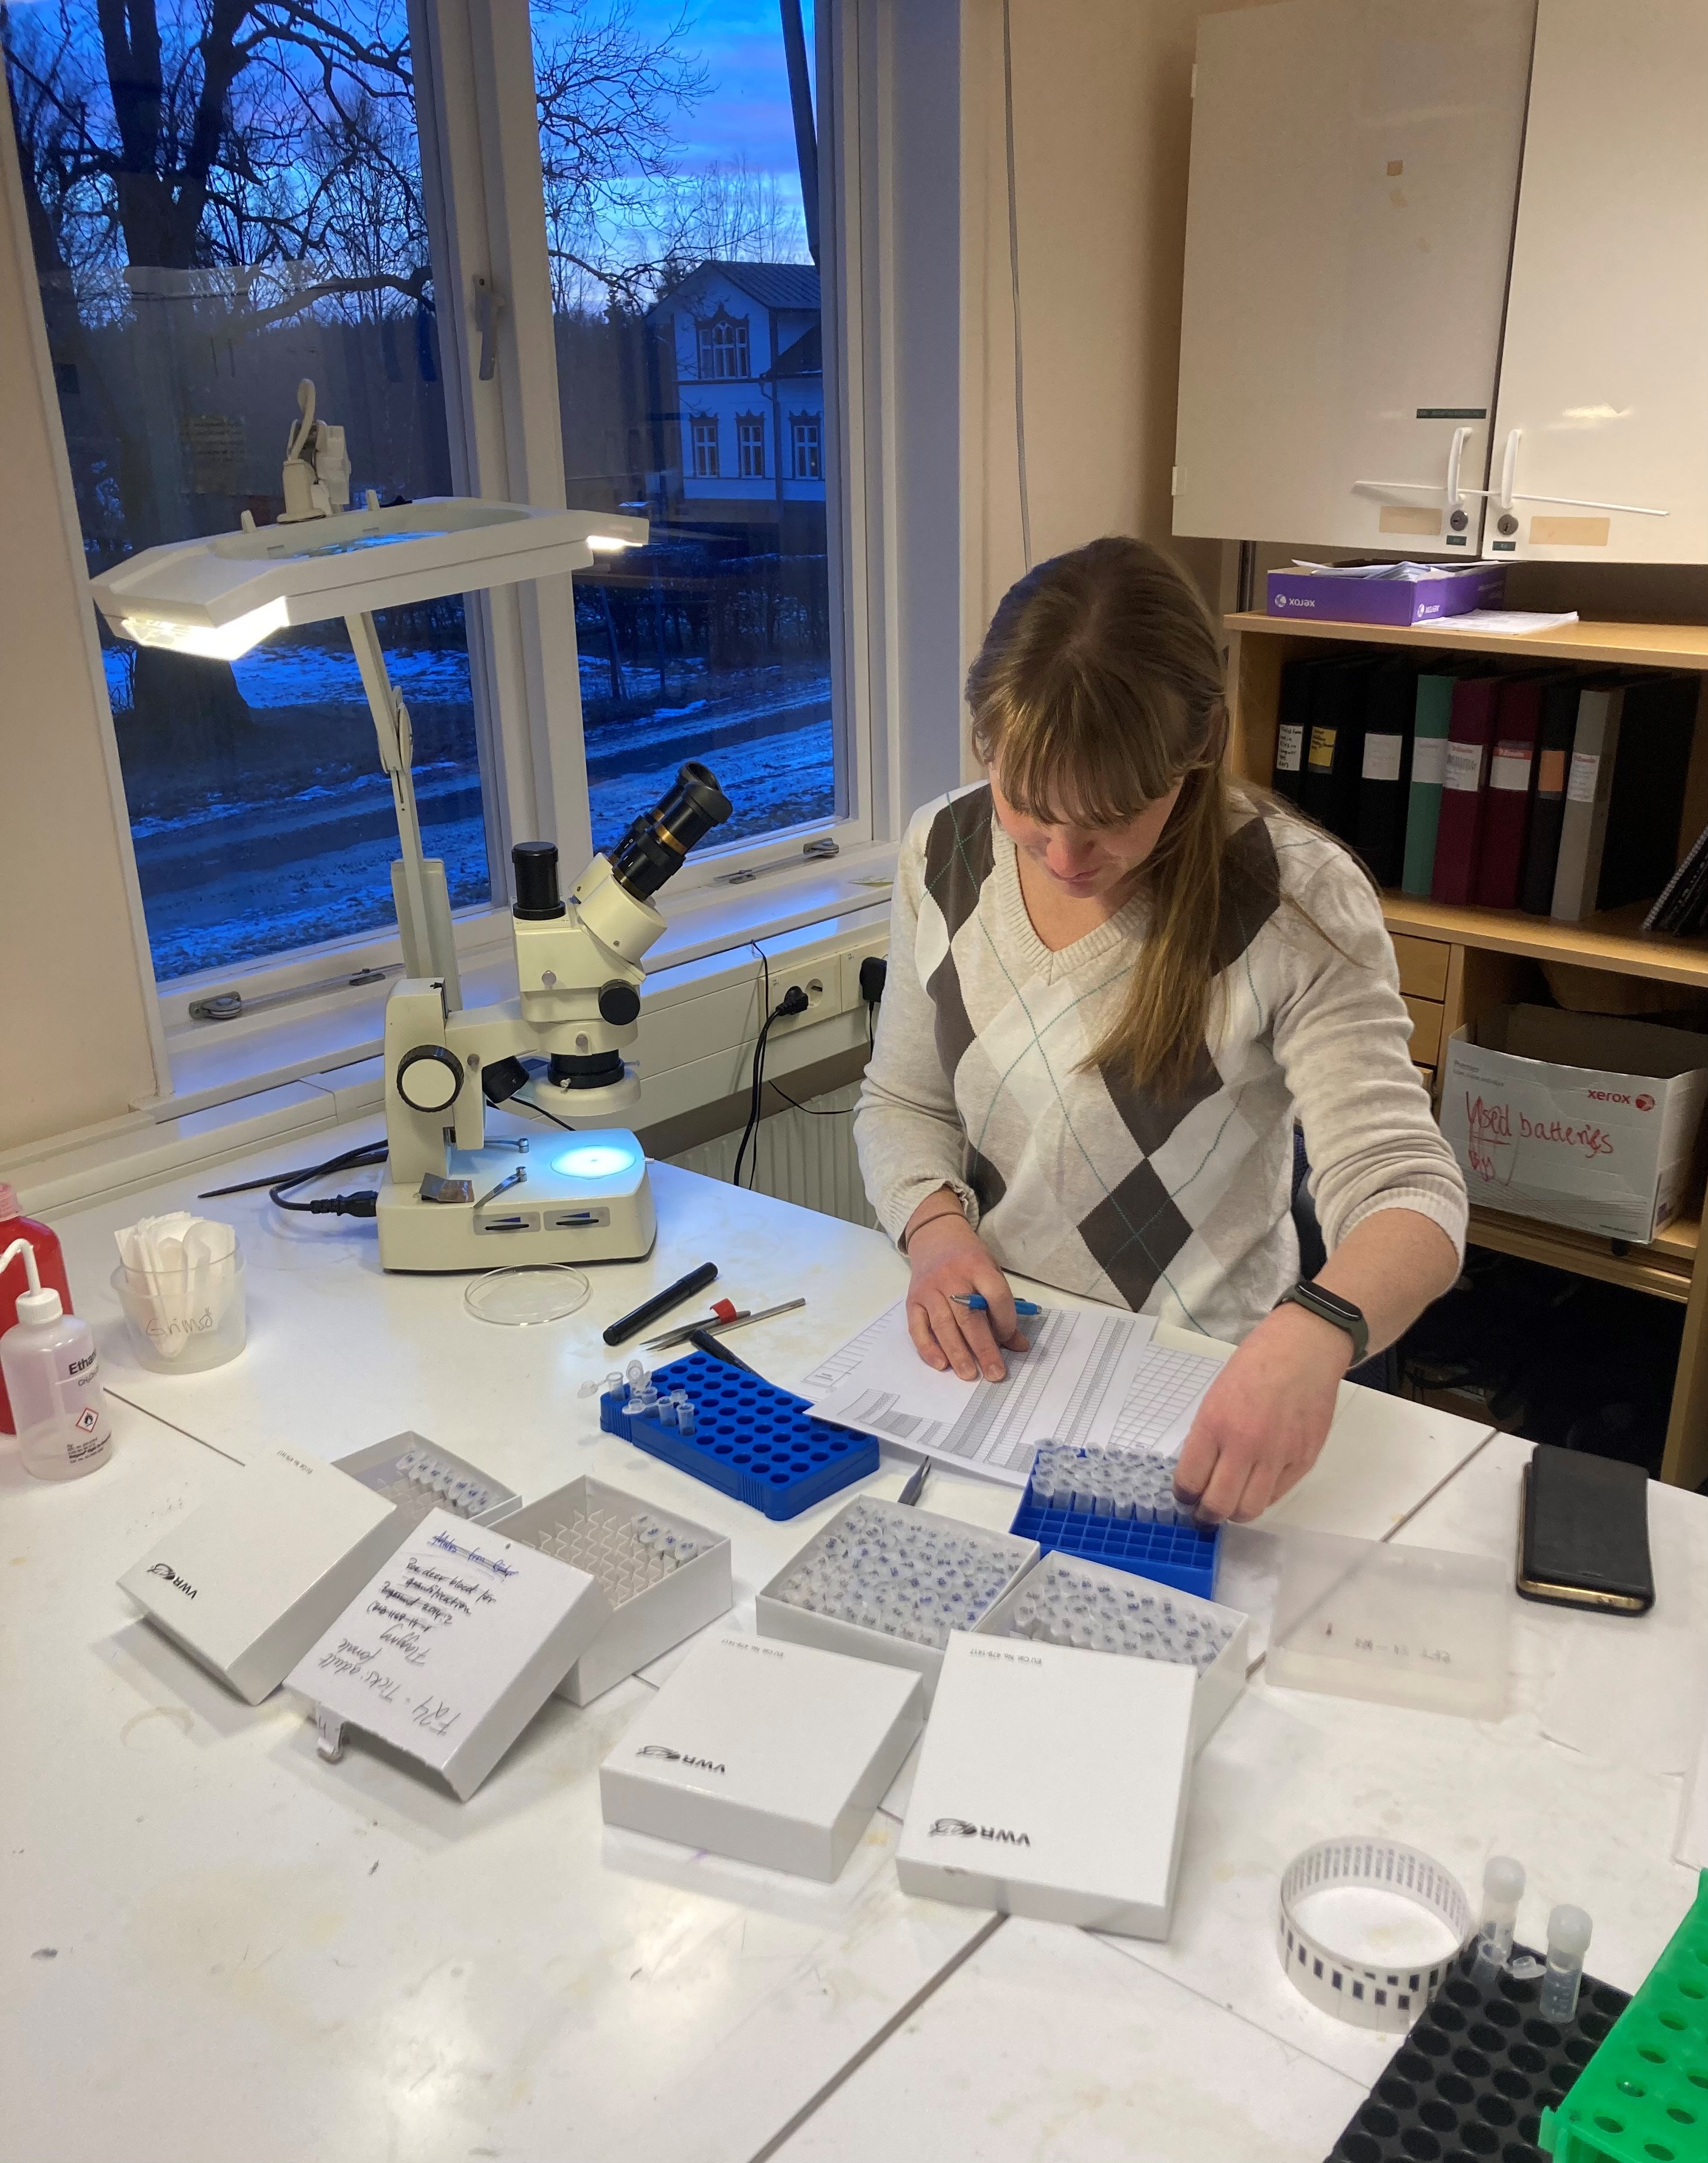 Every season hundreds of ticks are collected and good organization is needed to keep track of all these tiny samples. (Photo: Gunnar Jansson )